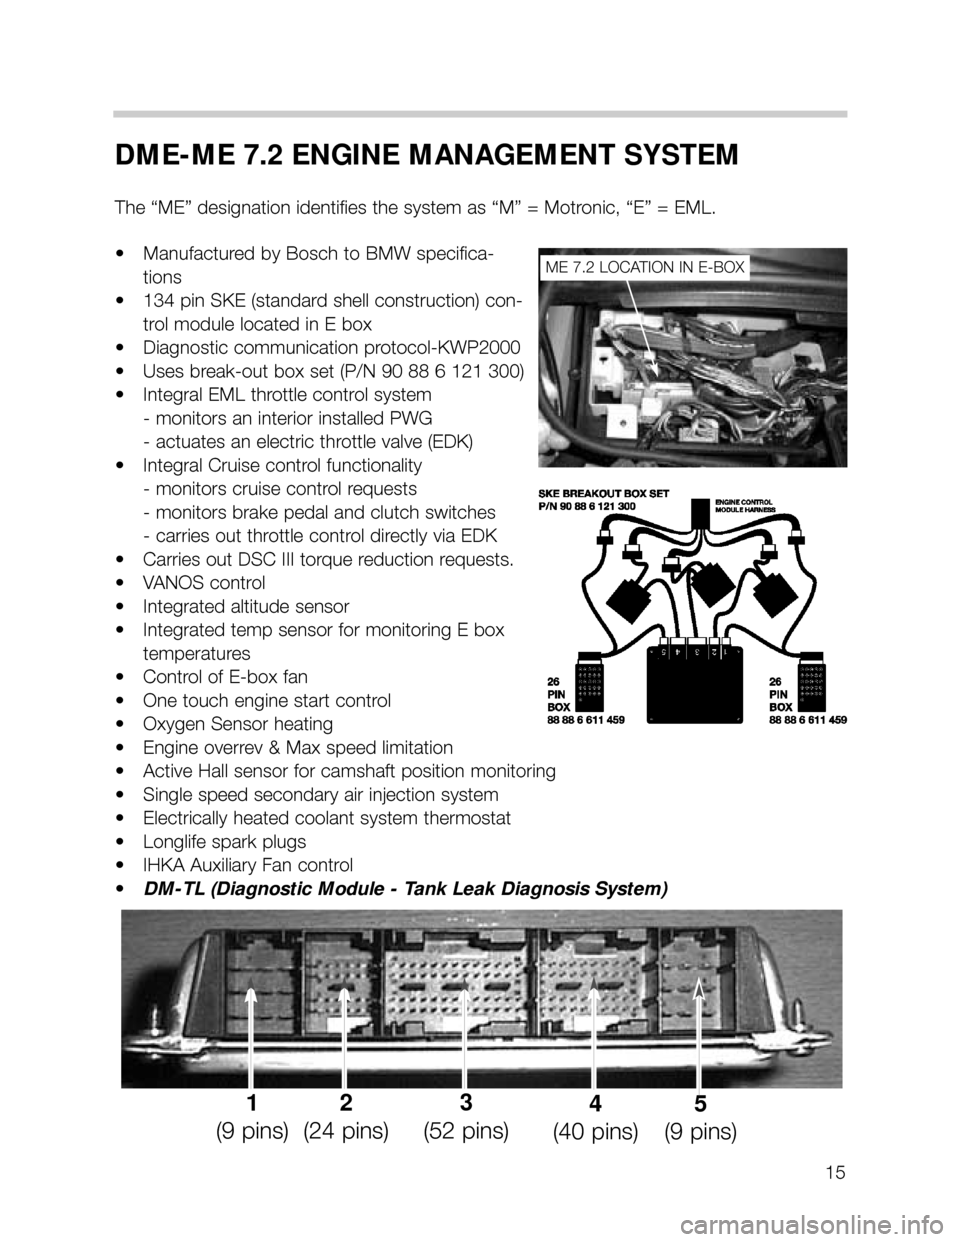 BMW 740i 2000 E38 M62TU Engine Workshop Manual 15
DME-ME 7.2 ENGINE MANAGEMENT SYSTEM
The “ME” designation identifies the system as “M” = Motronic, “E” = EML.
• Manufactured by Bosch to BMW specifica-
tions
• 134 pin SKE (standard 